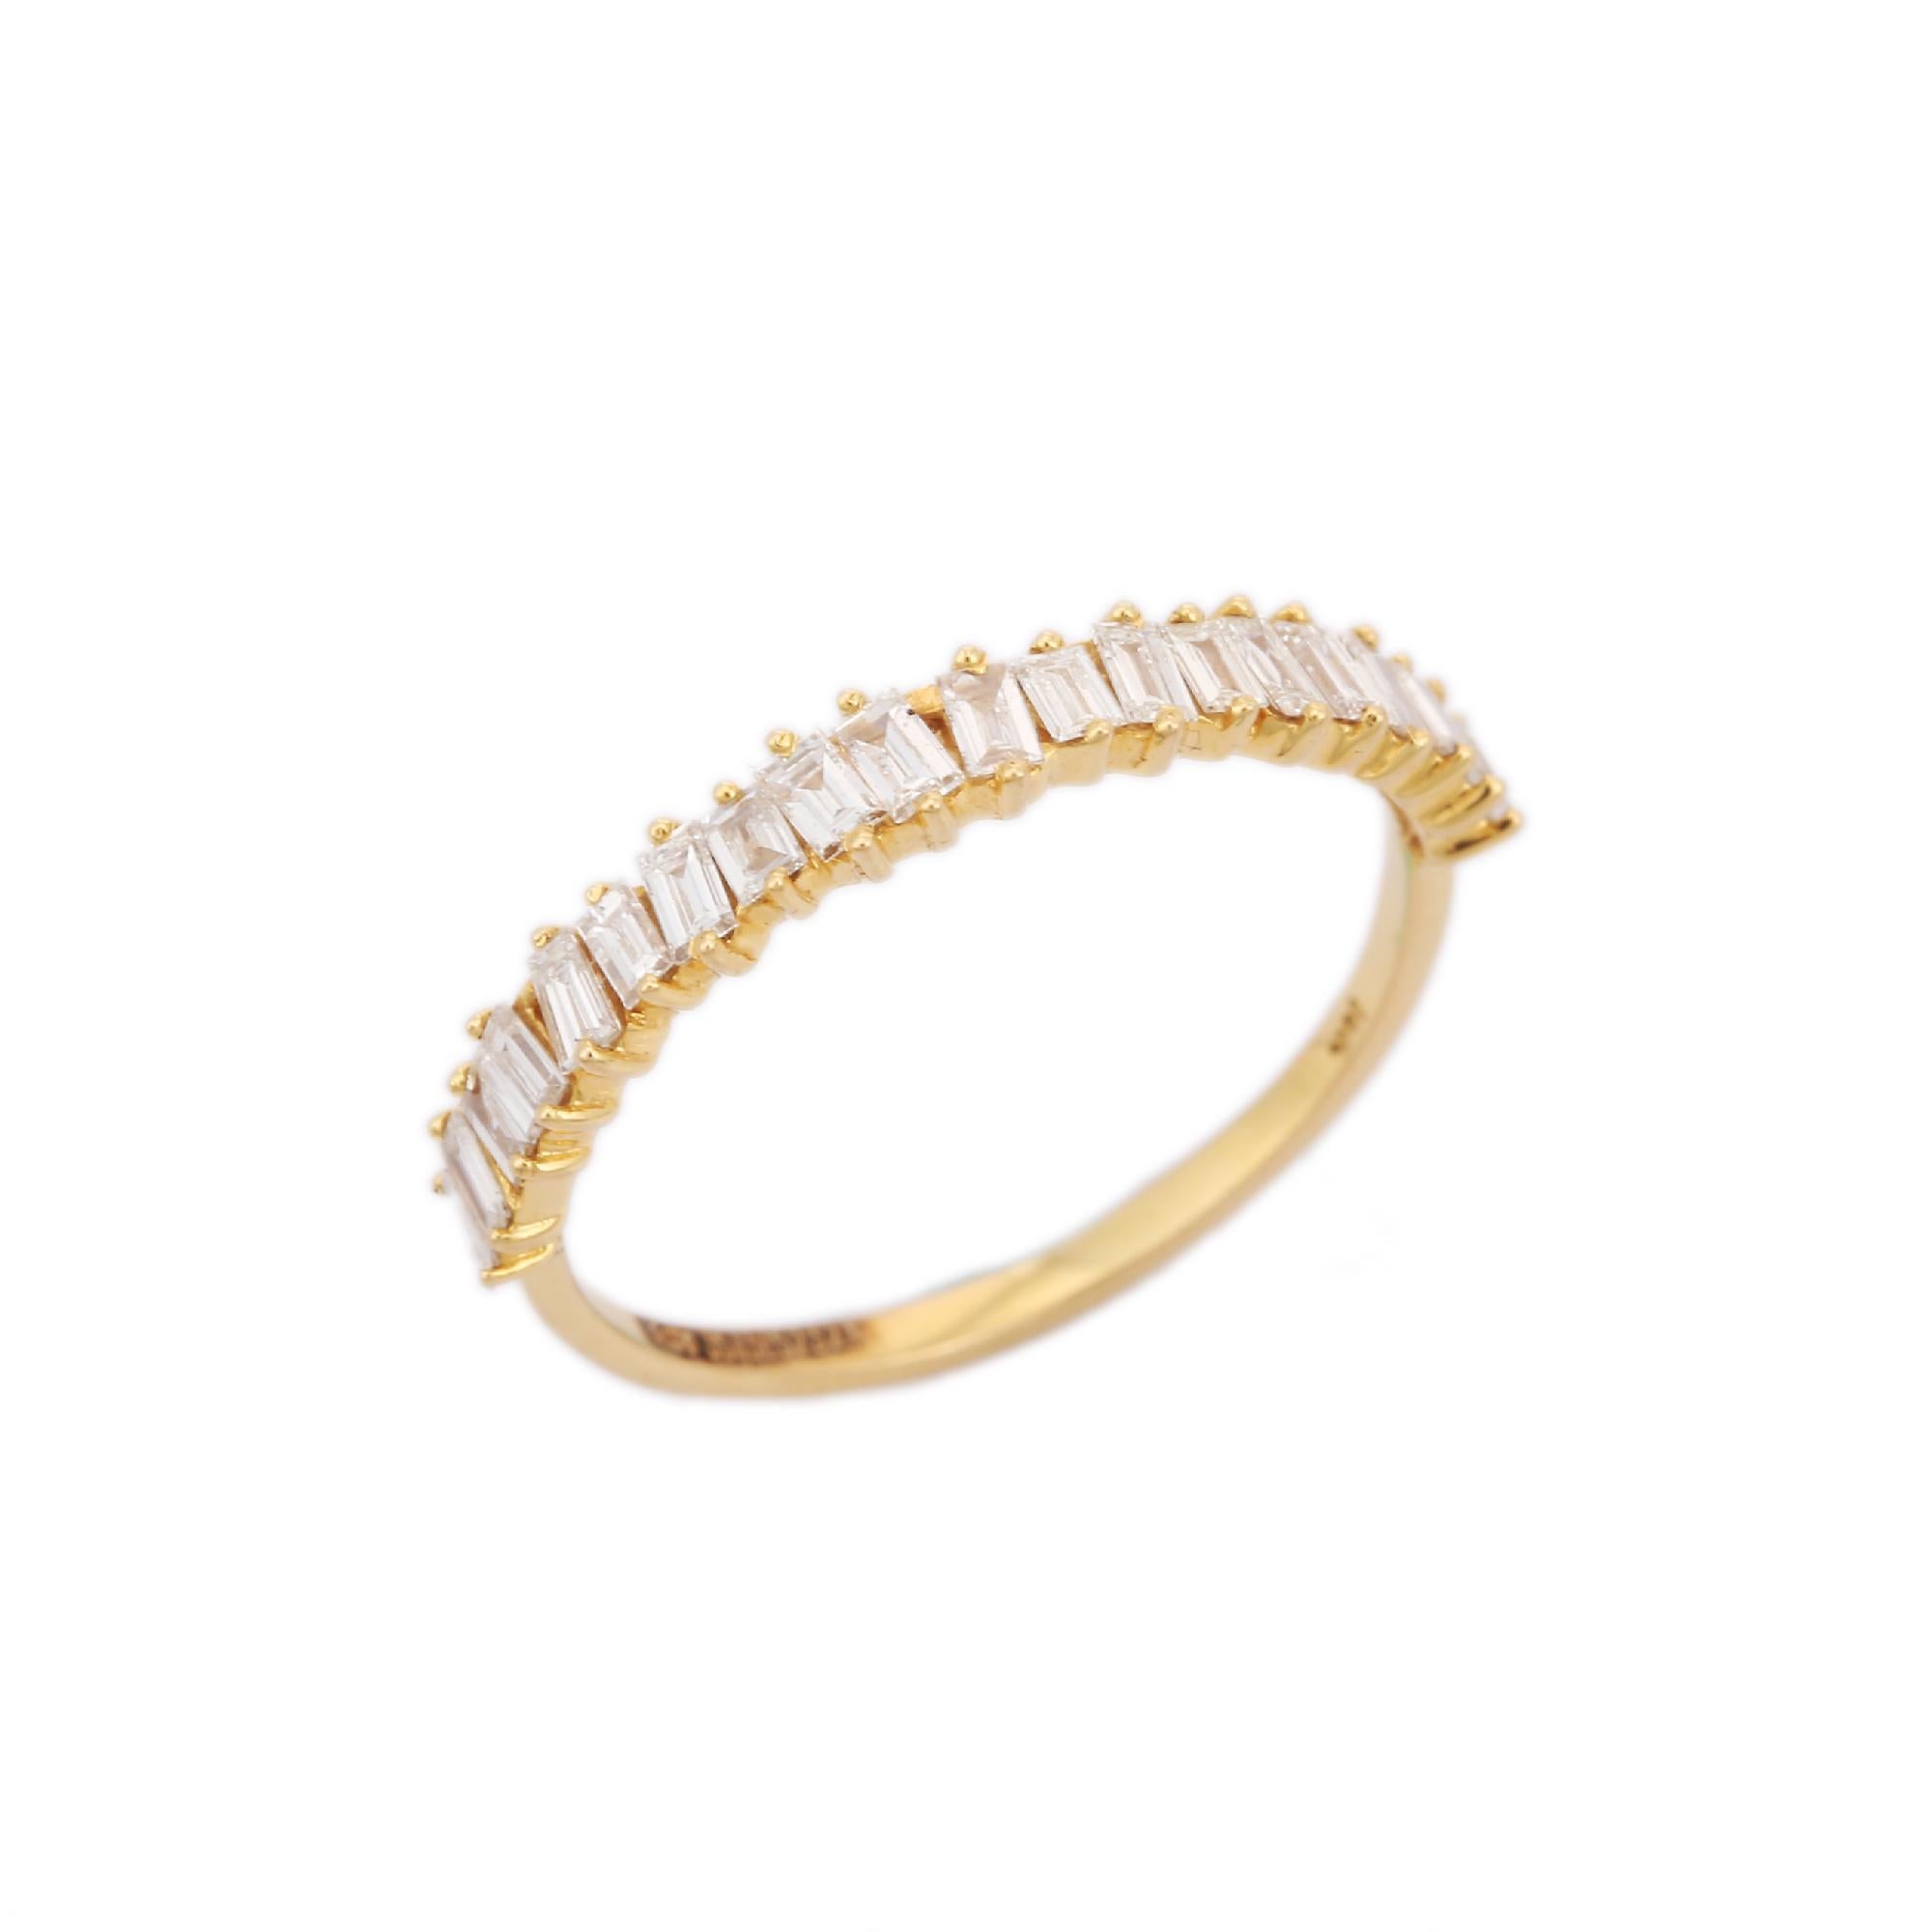 For Sale:  Minimalist Baguette Diamond Band Ring 18K Yellow Gold Stackable Engagement Band 4